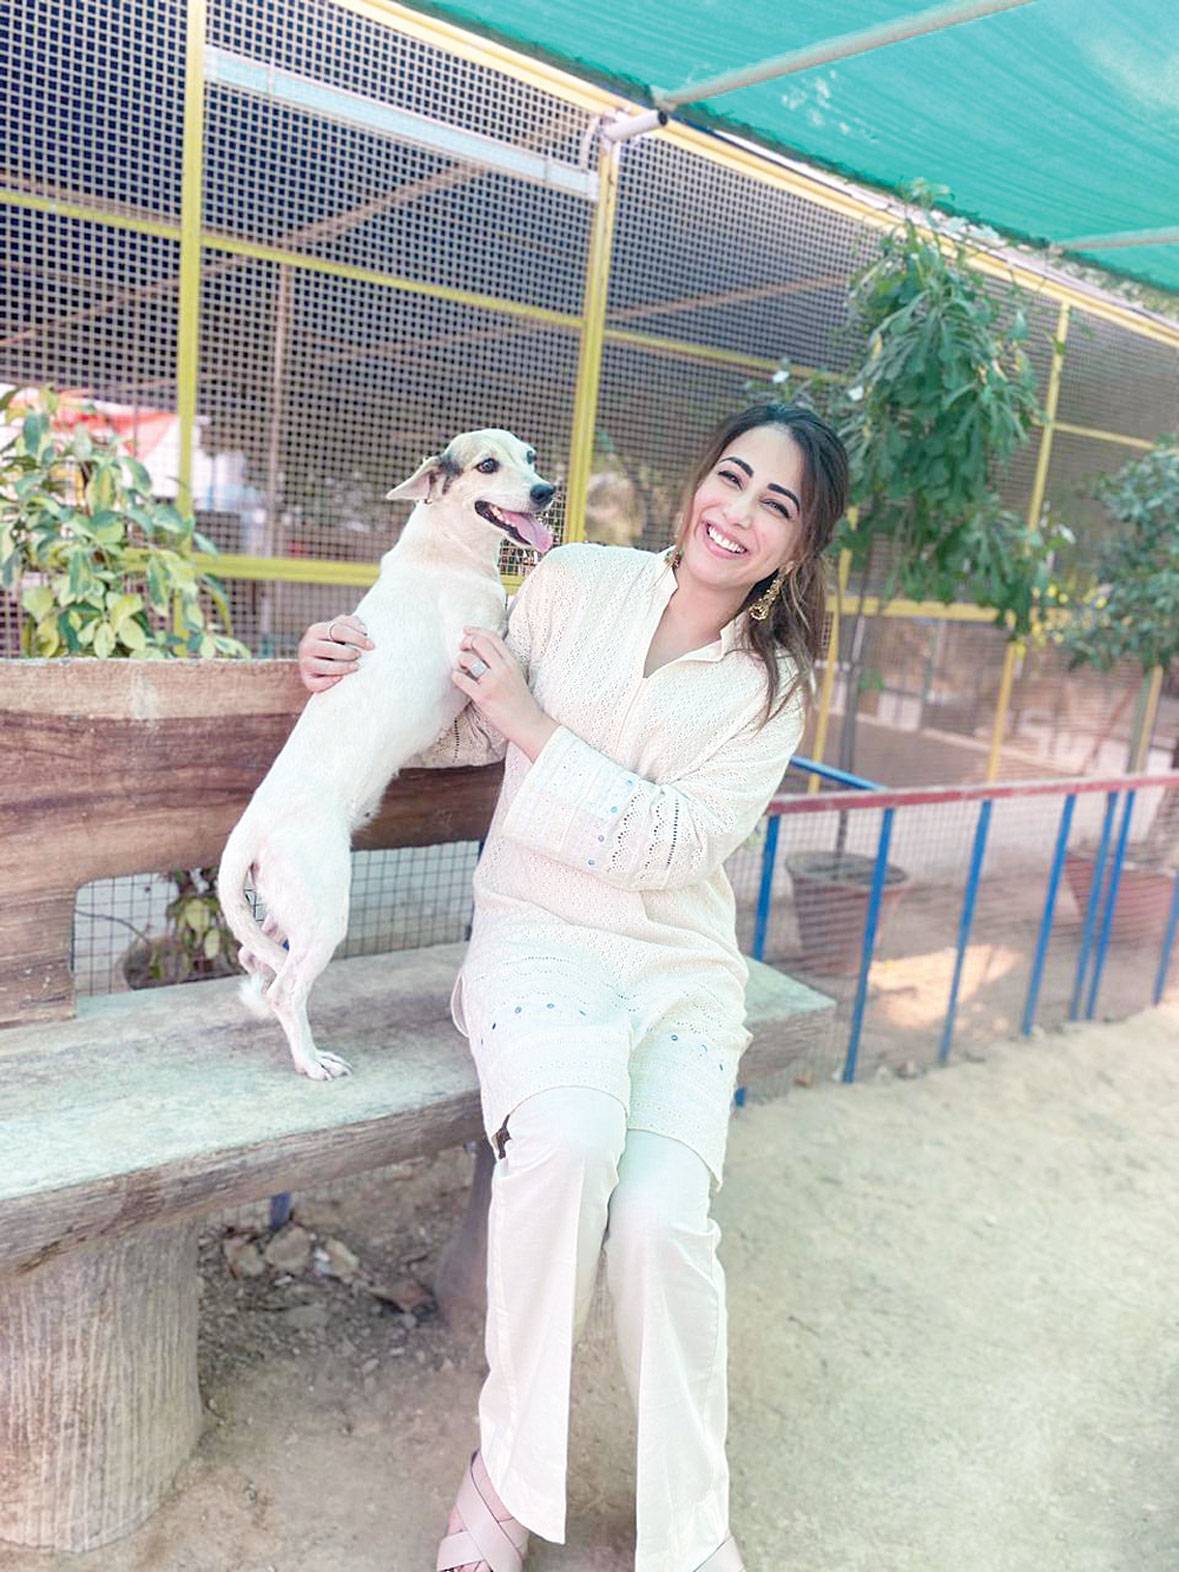 Ushna Shah spotted spending a day dedicated to cutest dog